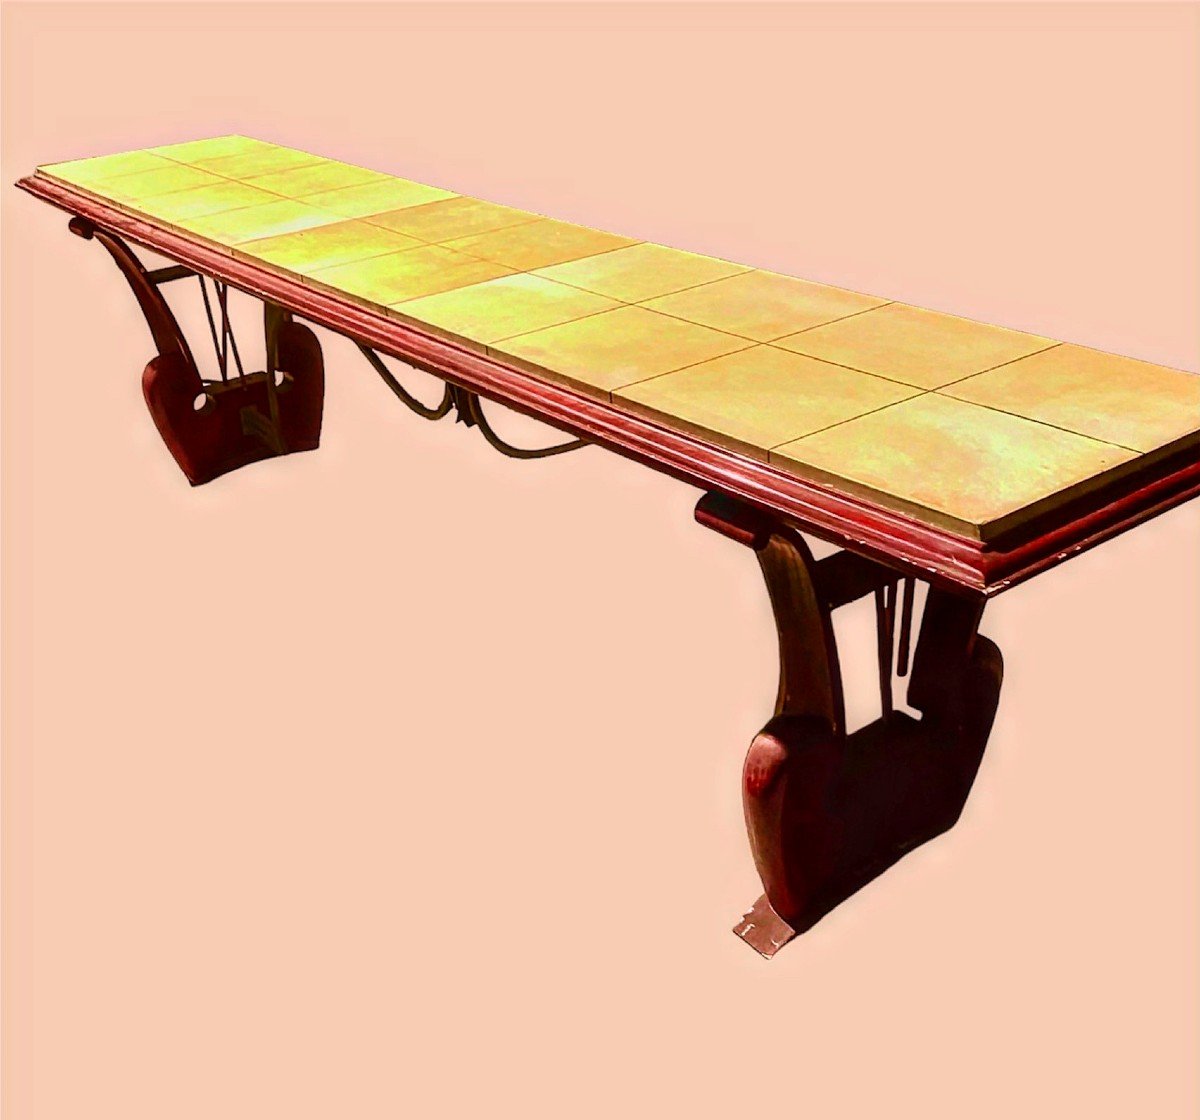 1940 Coffee Table/bench In The Taste Of Jean-charles Moreux